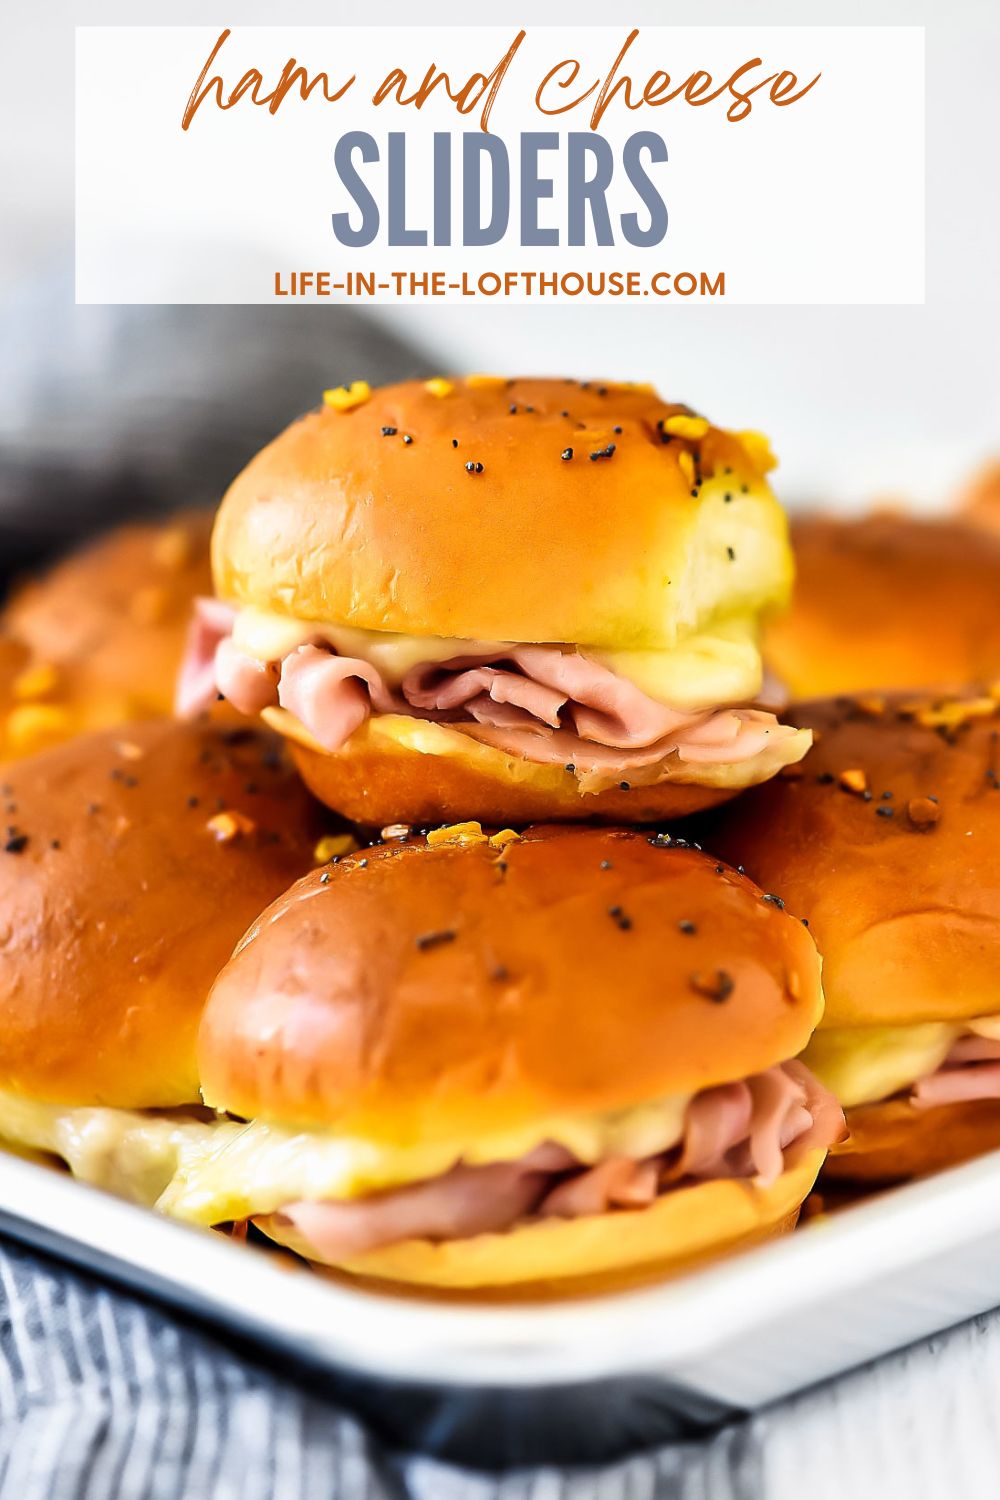 Ham and Cheese Sliders are savory and delicious baked ham sandwiches with a mustard poppy seed dressing. Life-in-the-Lofthouse.com